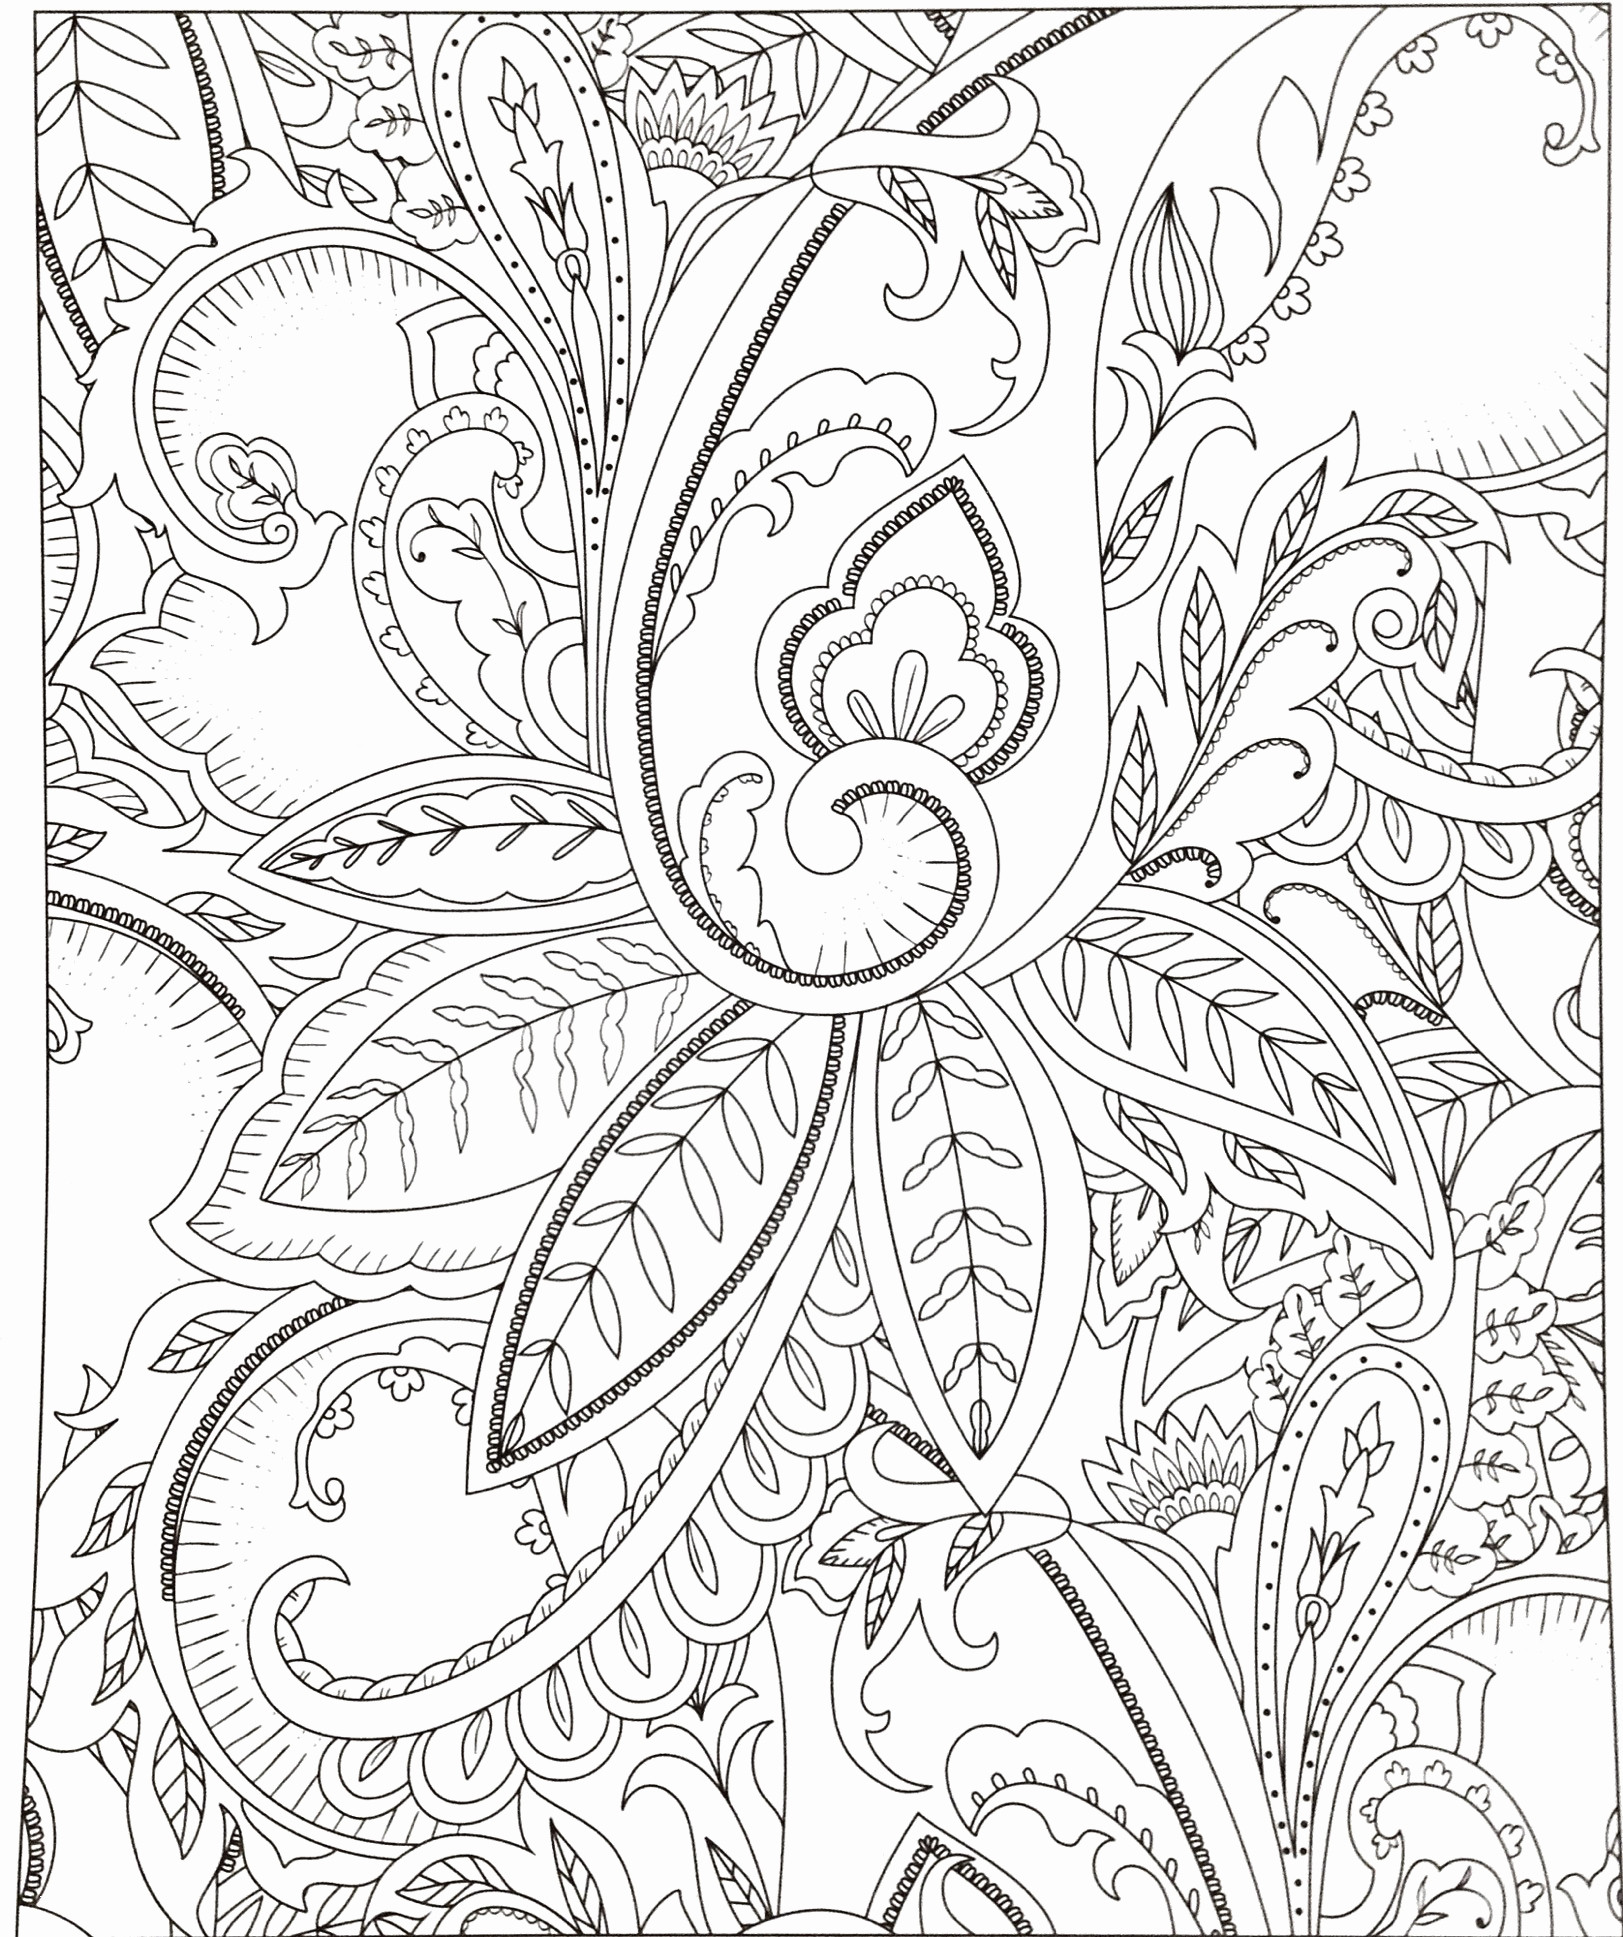 21 Stylish Flower Vase Stencil 2024 free download flower vase stencil of free dragon coloring page luxury cool vases flower vase coloring for coloring pages from disney unique print free coloring pages disney new cool coloring pages printab